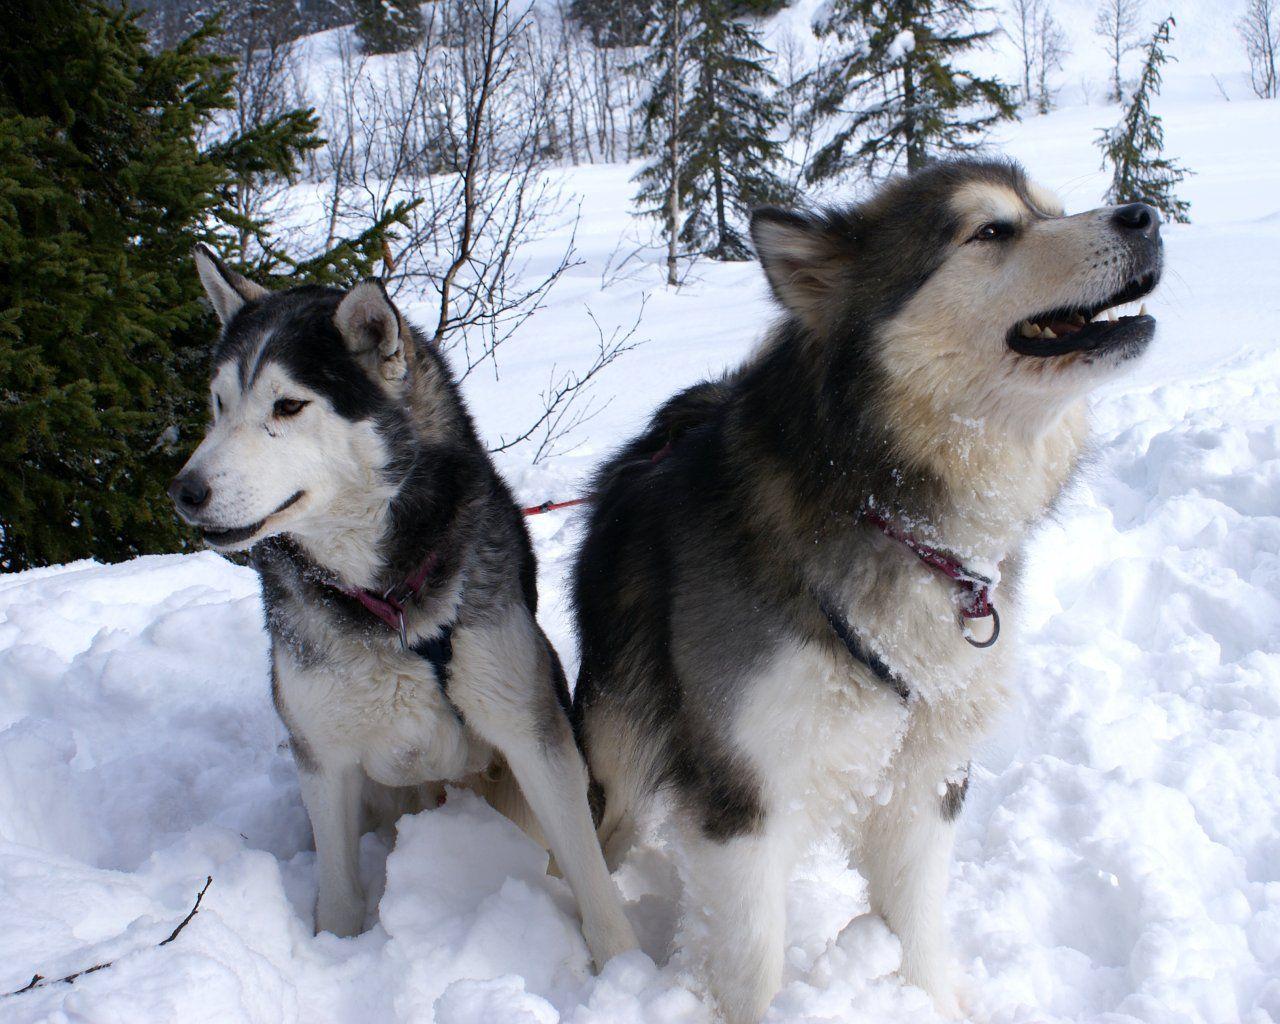 Siberian Husky dogs in the snow photo and wallpaper. Beautiful